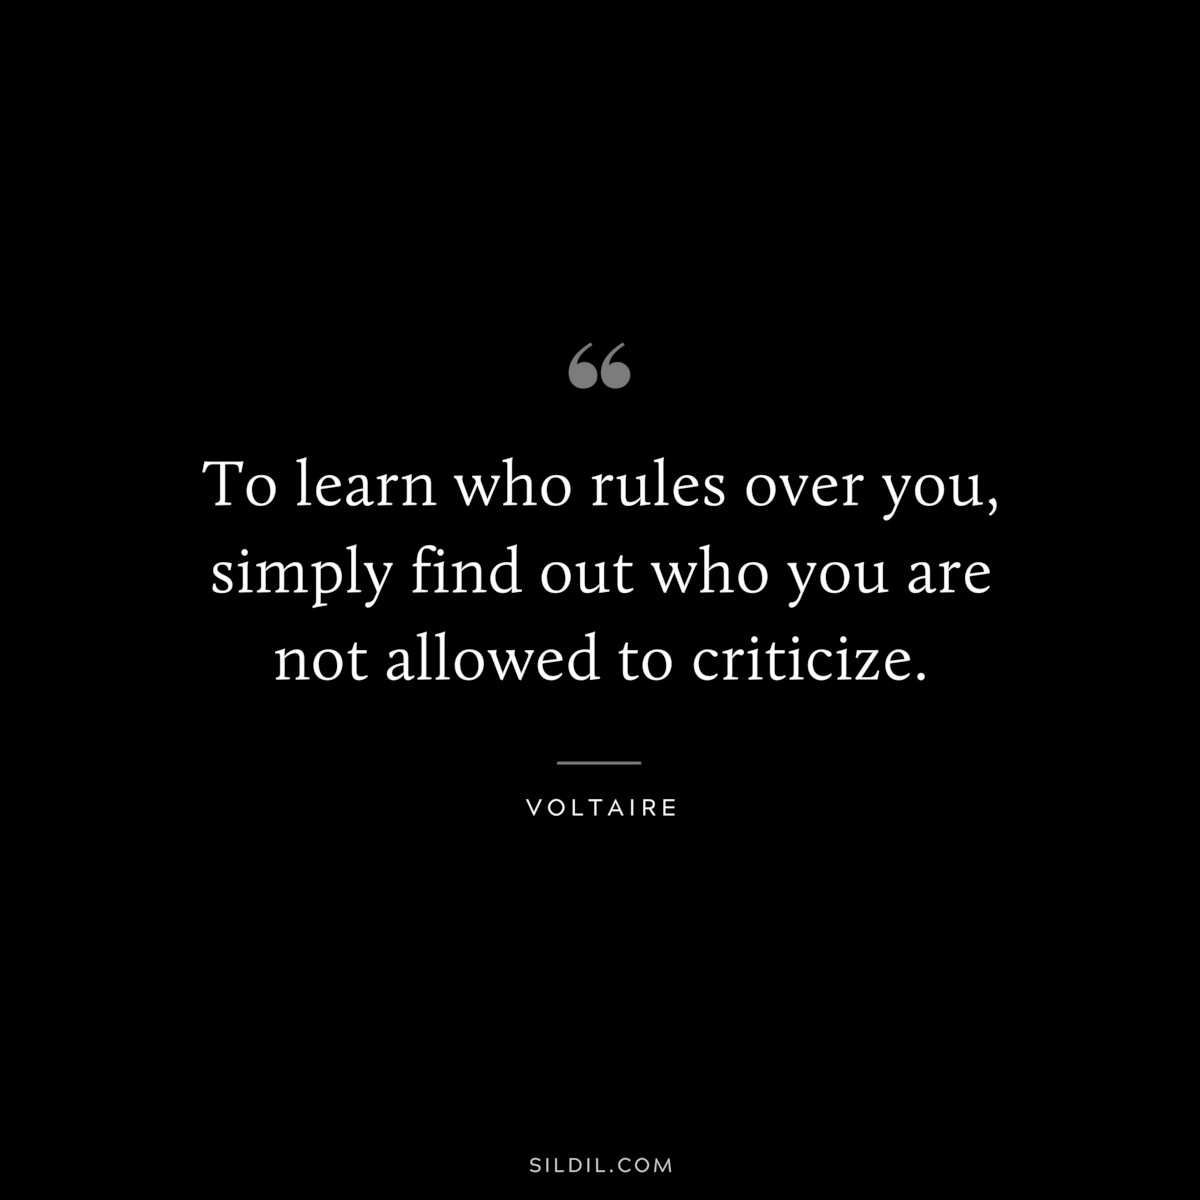 To learn who rules over you, simply find out who you are not allowed to criticize. ― Voltaire